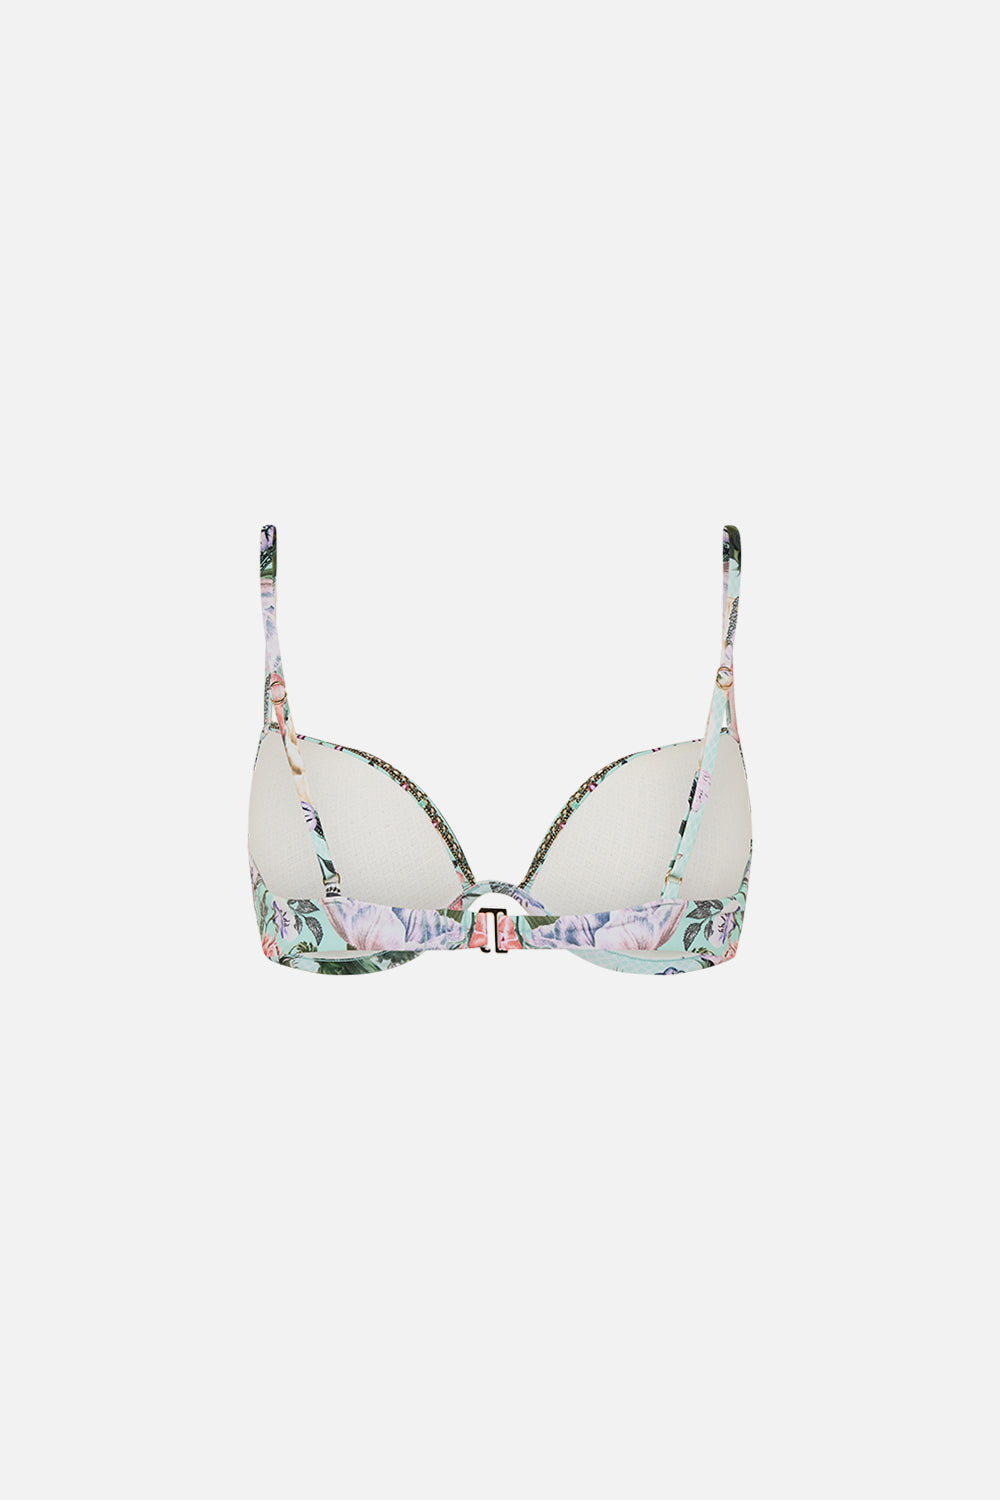 CAMILLA floral continuous wire moulded bra in Petal Promise Land